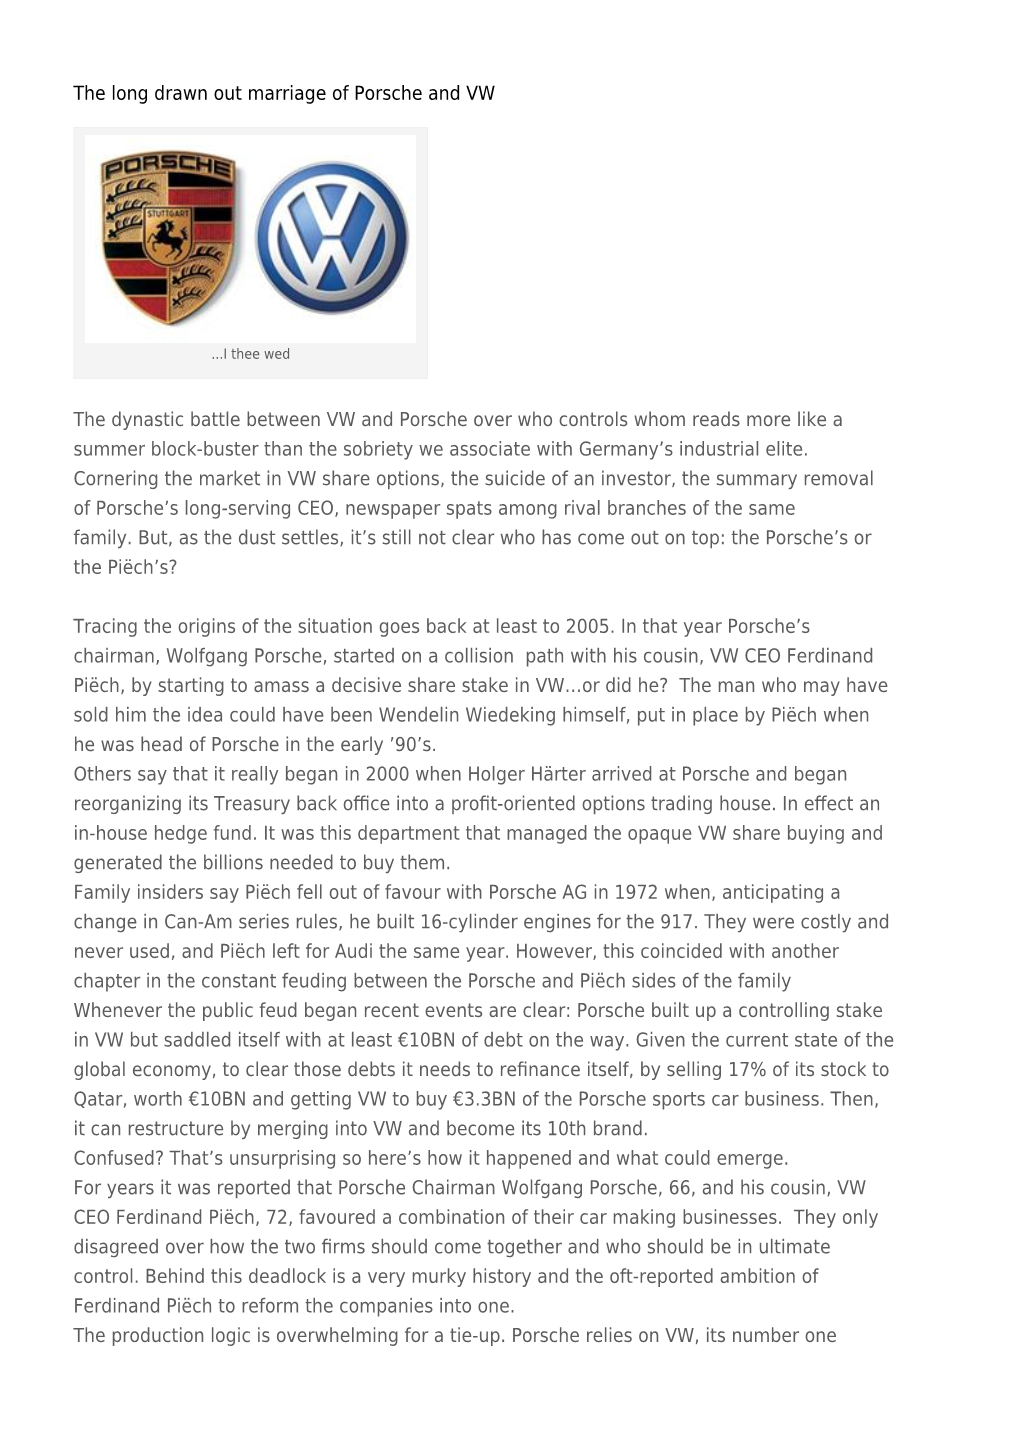 The Long Drawn out Marriage of Porsche and VW